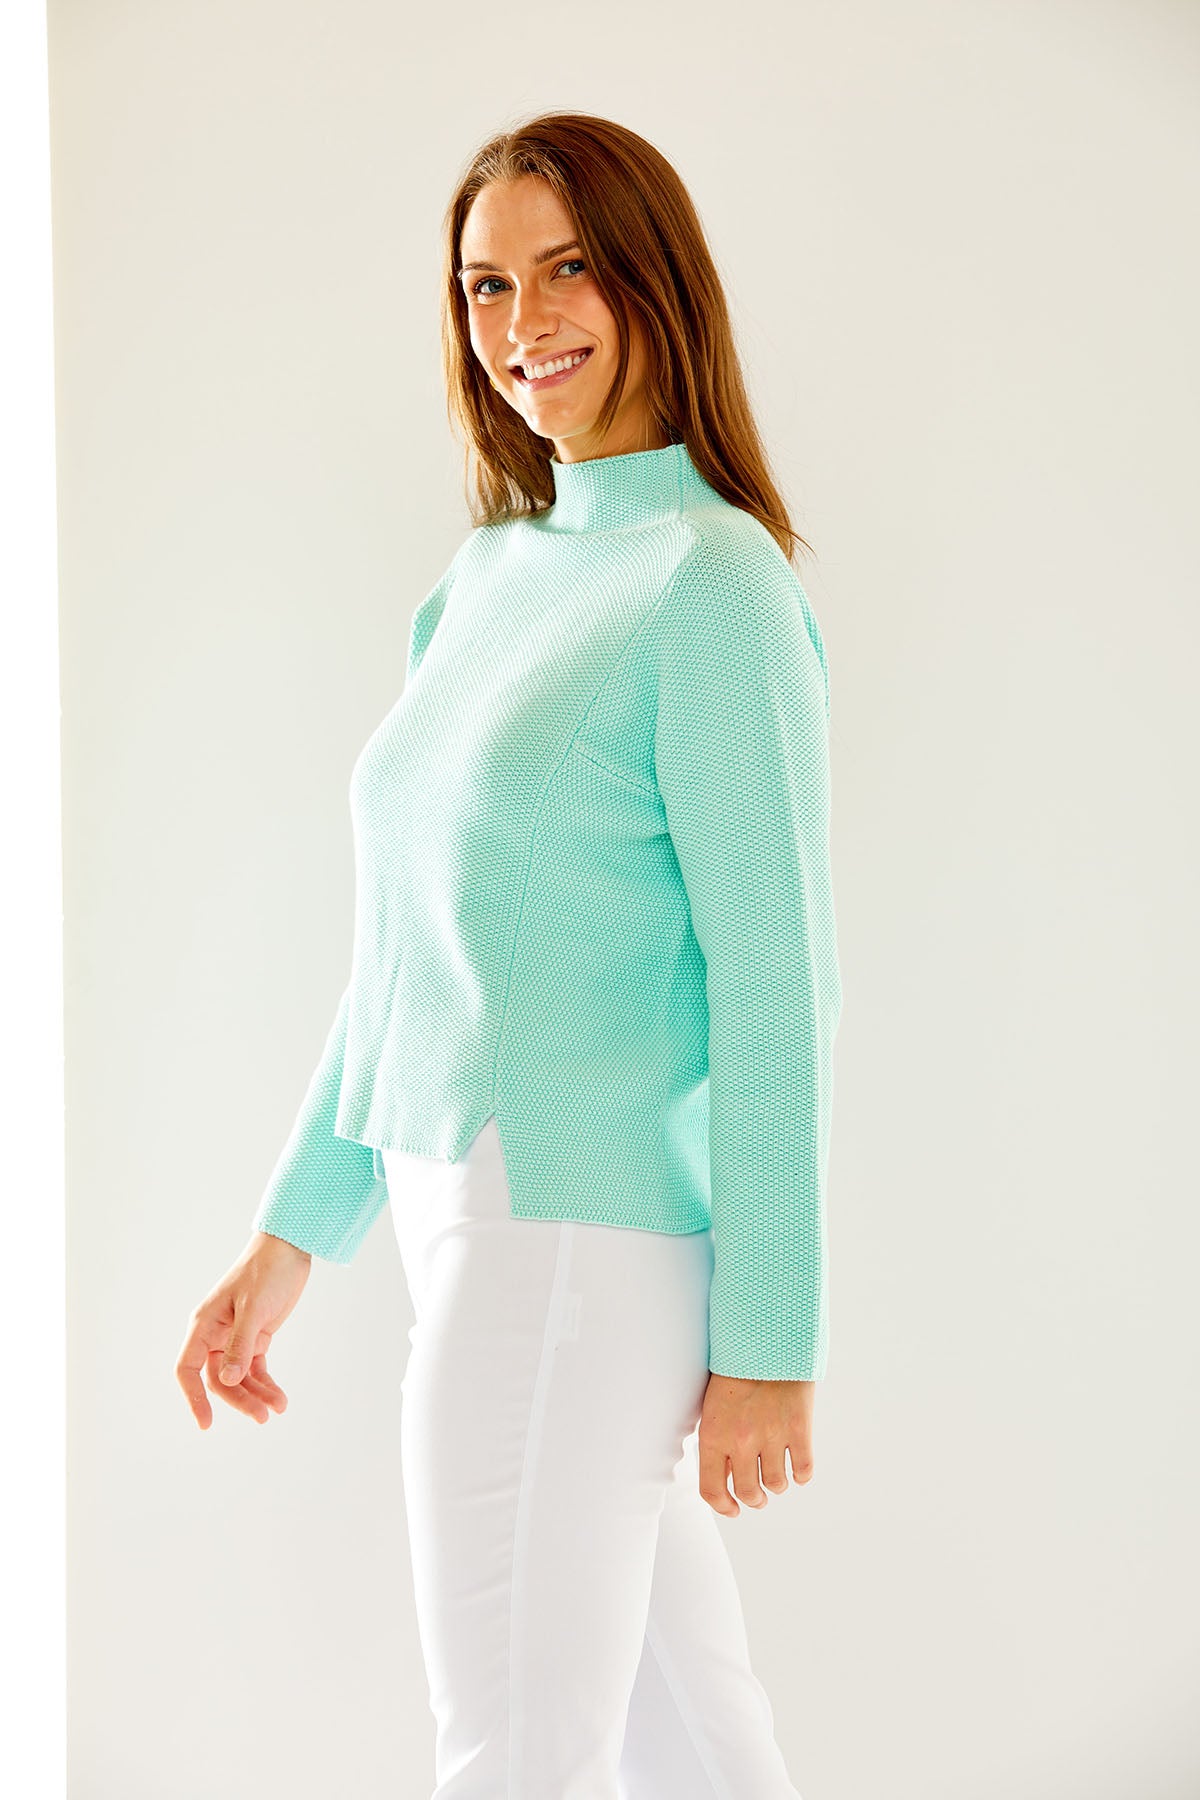 Woman wearing a turquoise sweater